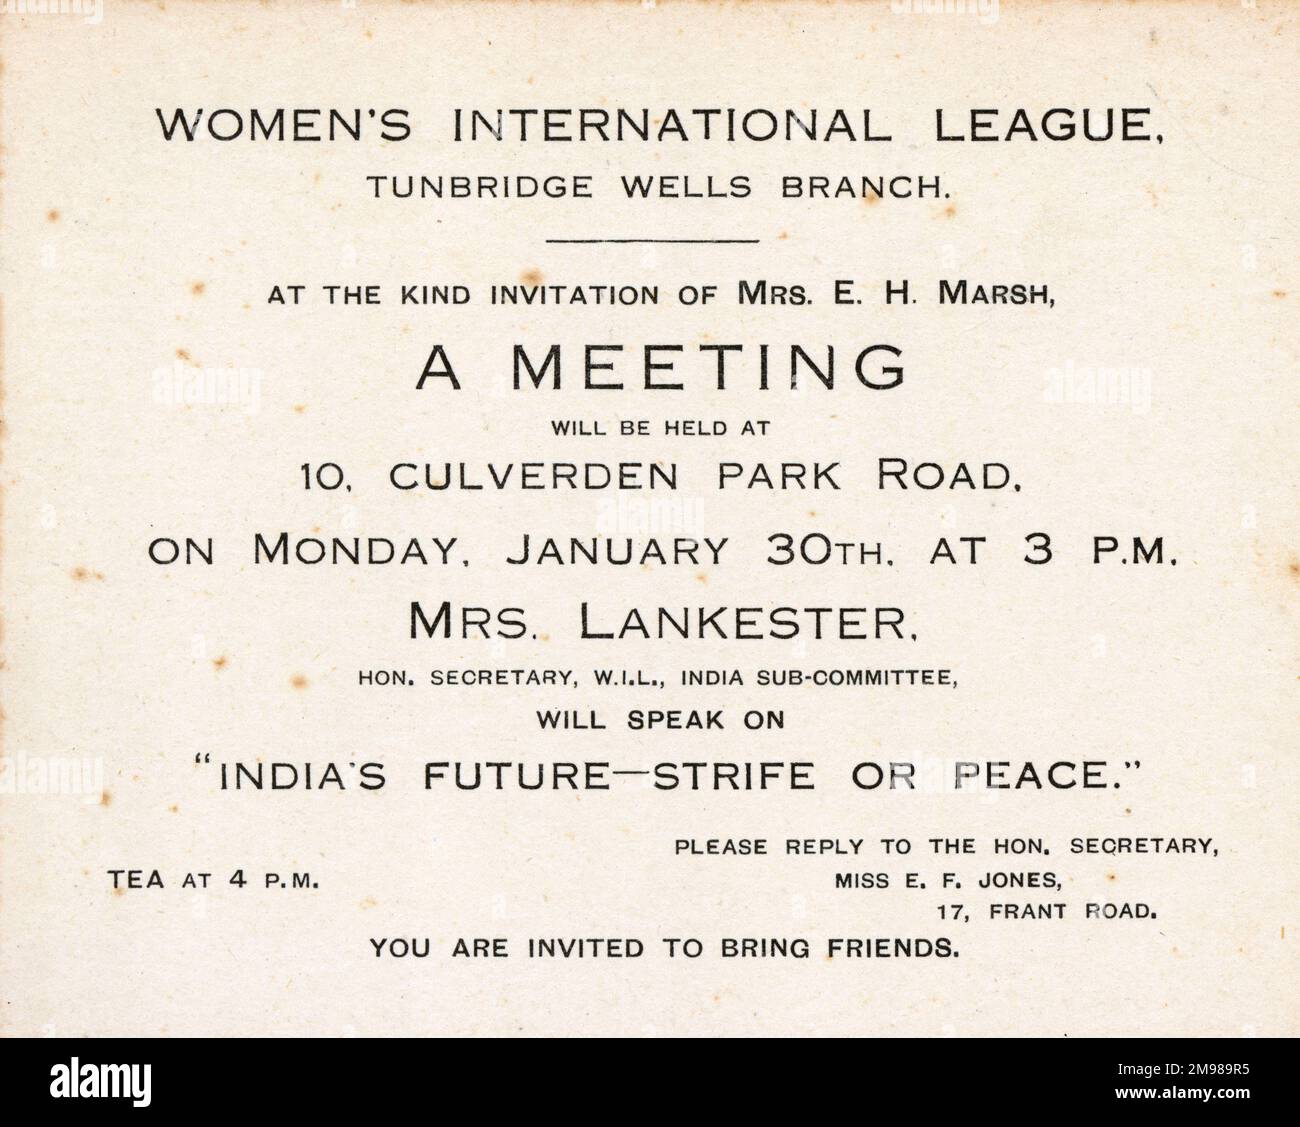 Invitation card, Women's International League for Peace and Freedom, Tunbridge Wells Branch, for a meeting with Mrs [Grace] Lankester, Hon. Secretary of the WIL and member of the India Sub-Committee, speaking on the subject of India's Future -- Strife or Peace. Stock Photo